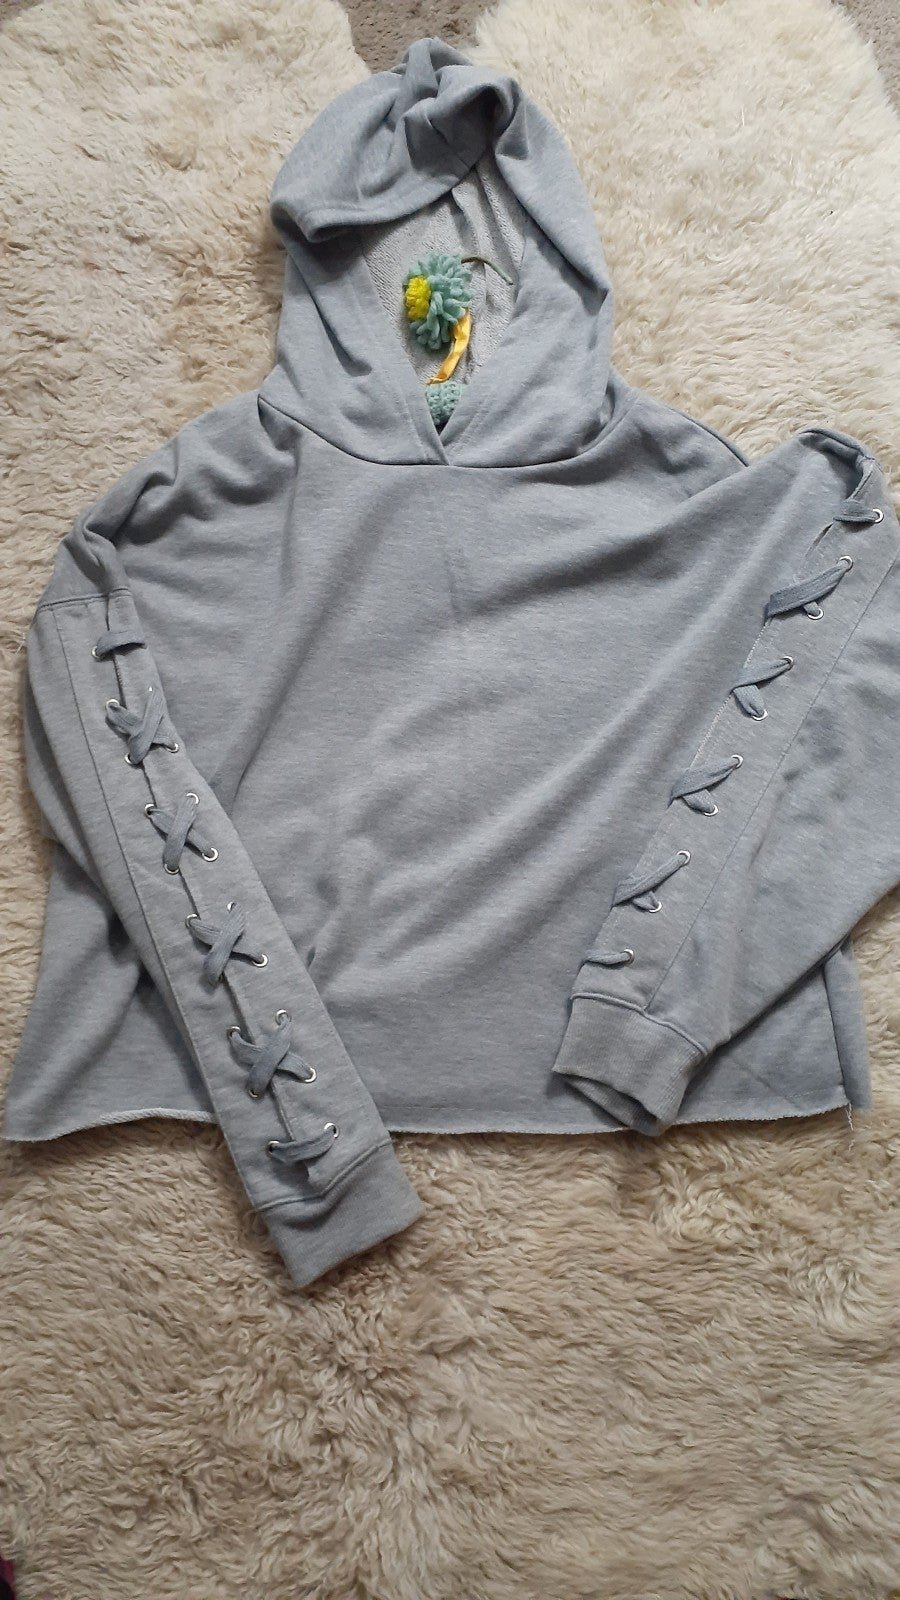 save up to 70% Rue21 Cropped Hoodie 2XL 2X XXL Criss Cr